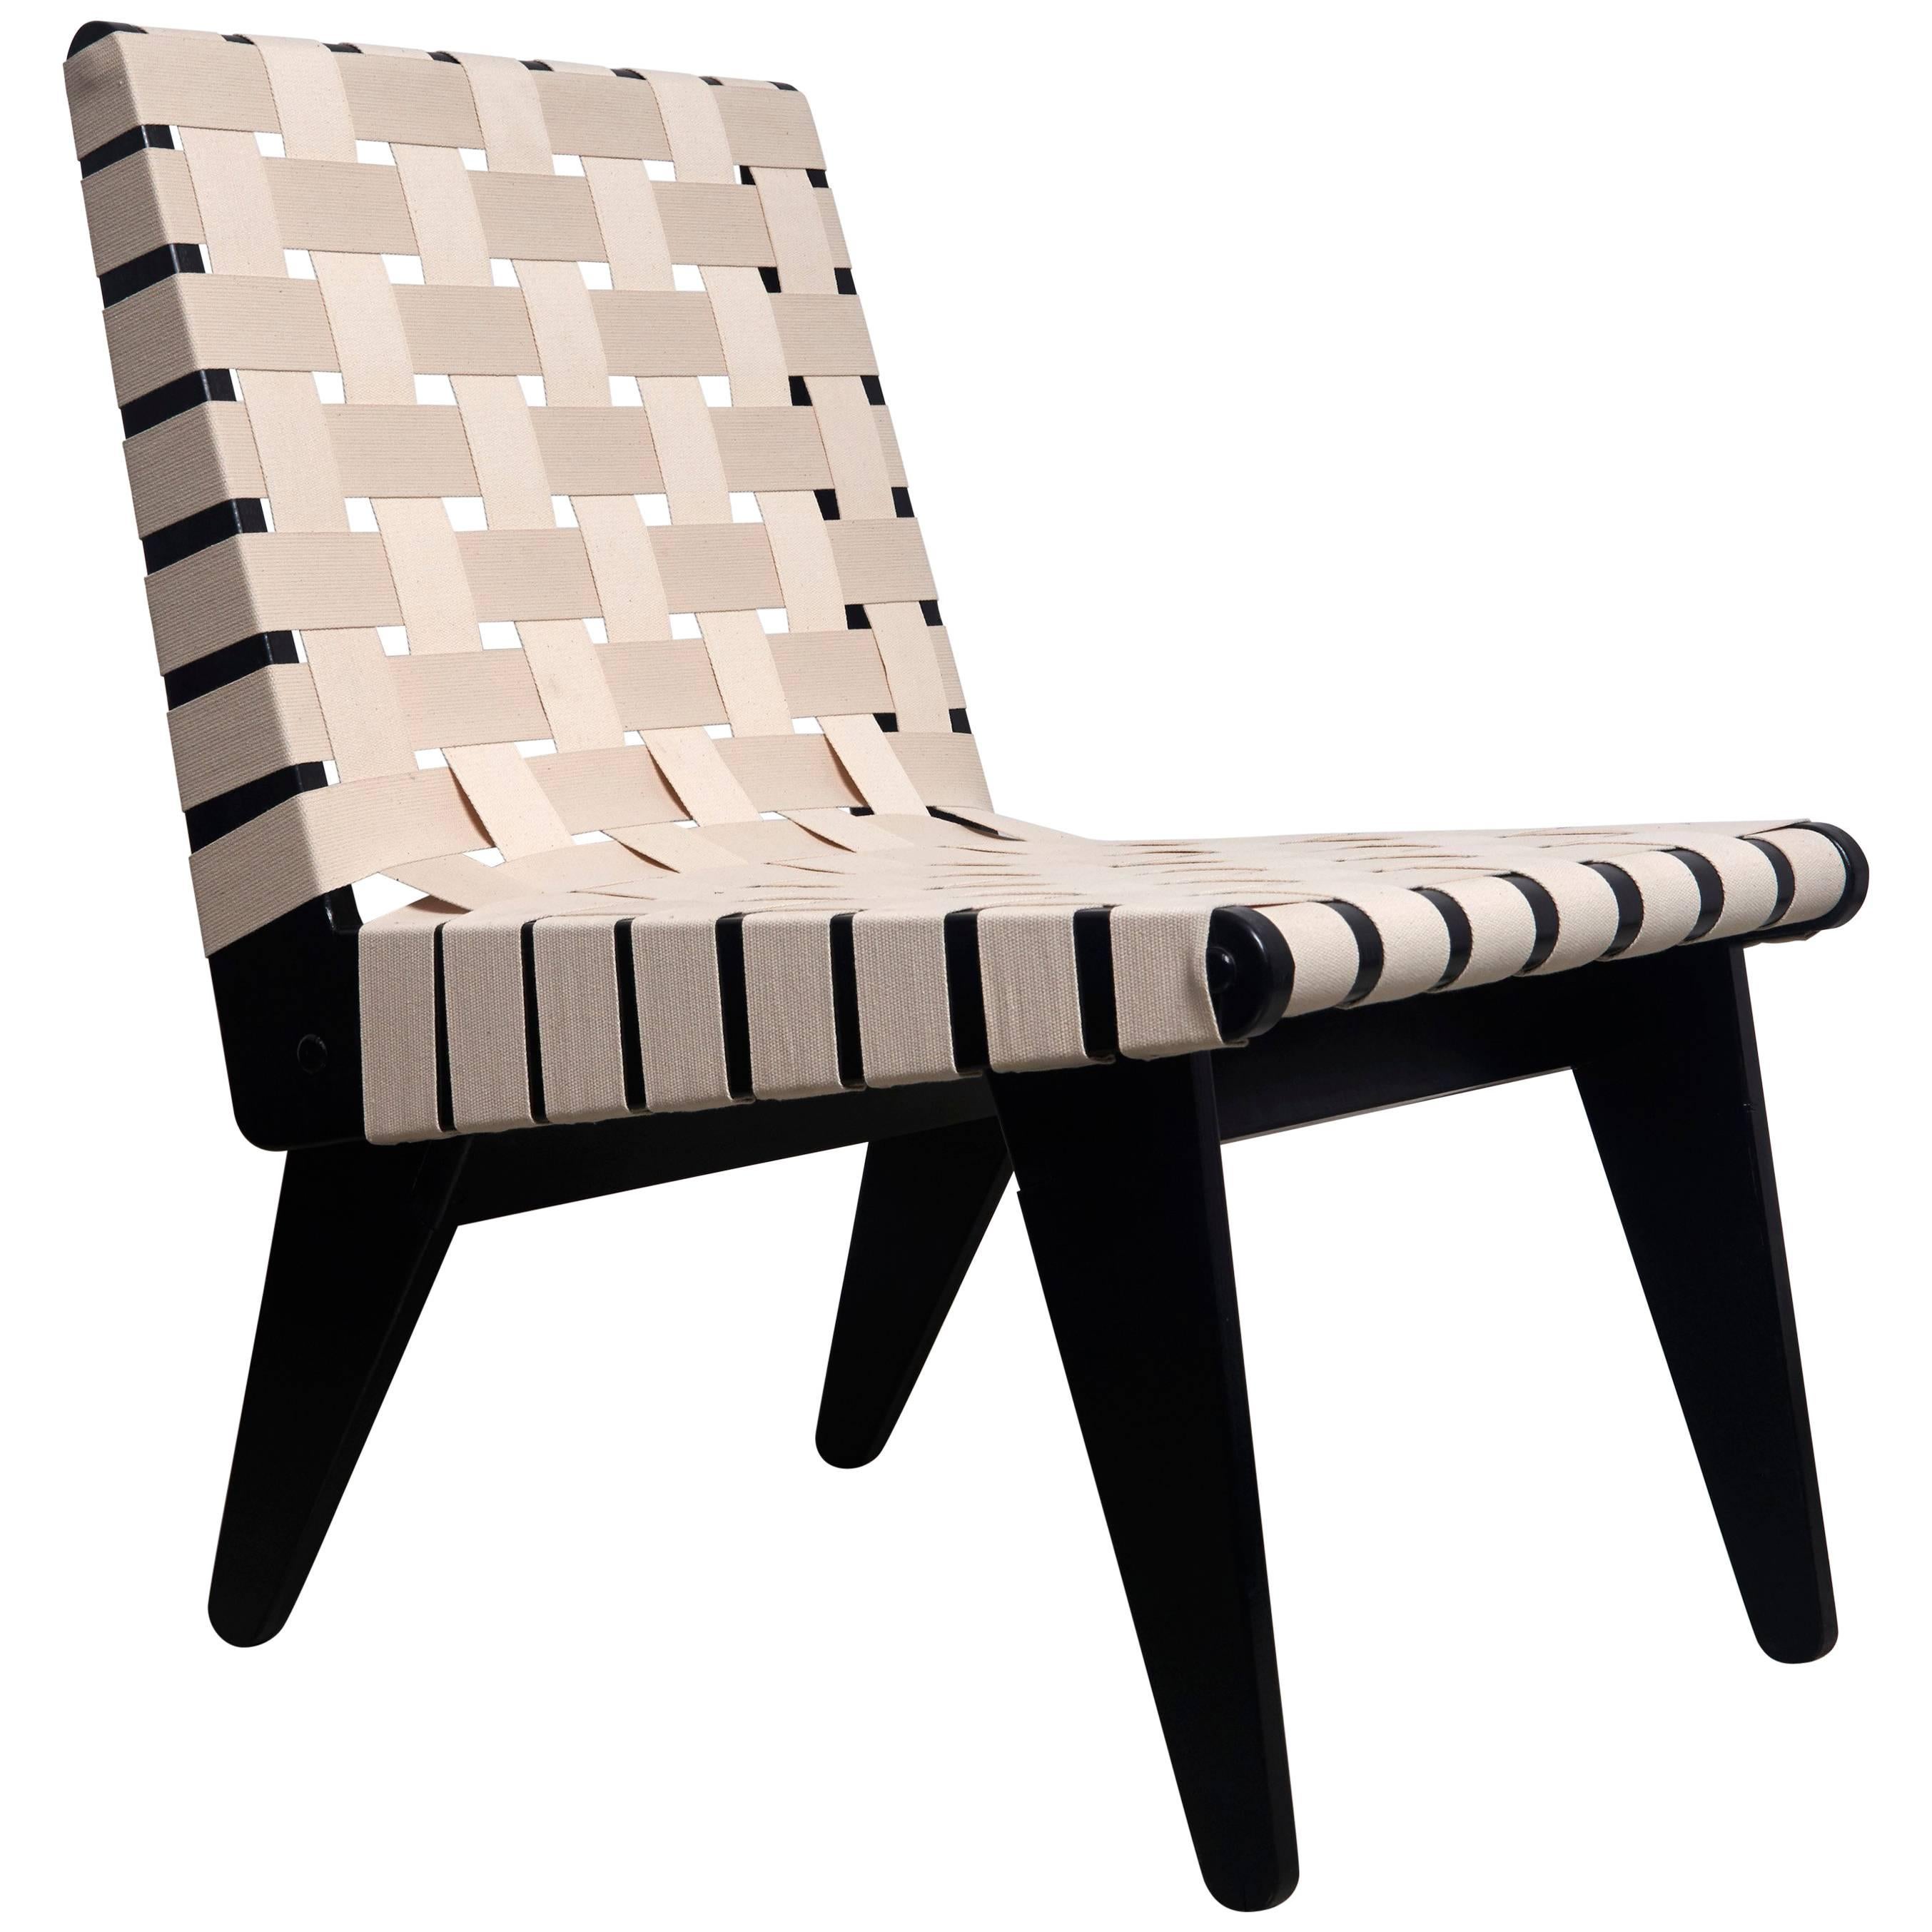 Klaus Grabe Lounge Chair with white cotton webbing and black frame